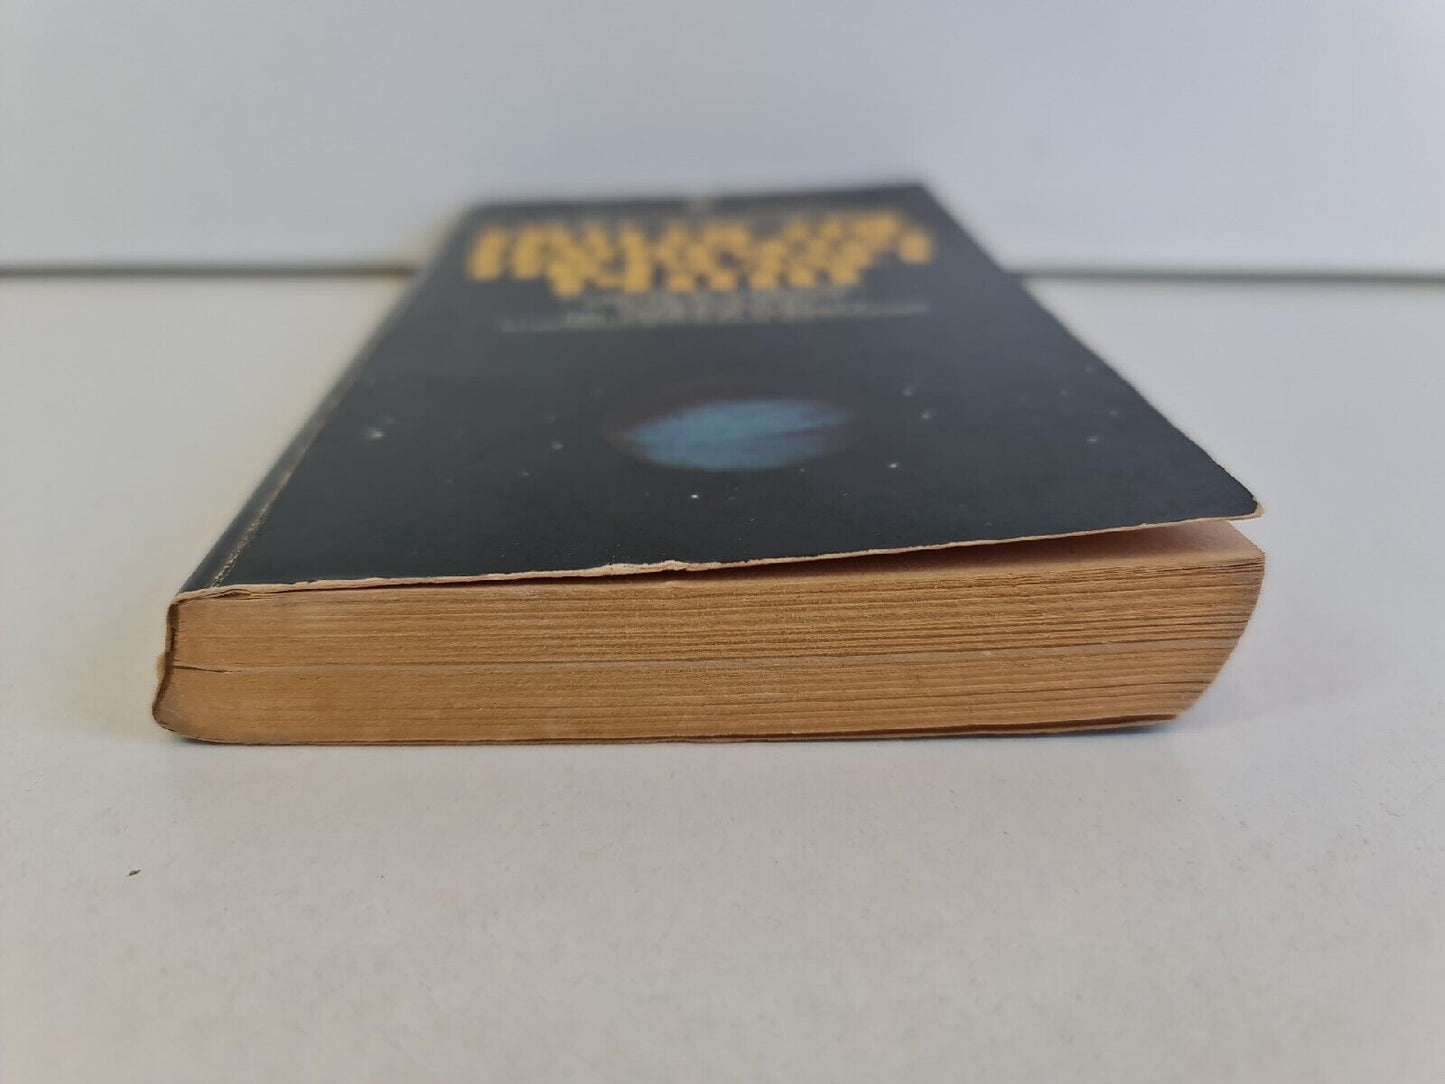 Out of the Darkness: The Planet Pluto by Tombaugh / Patrick Moore - PB 1981